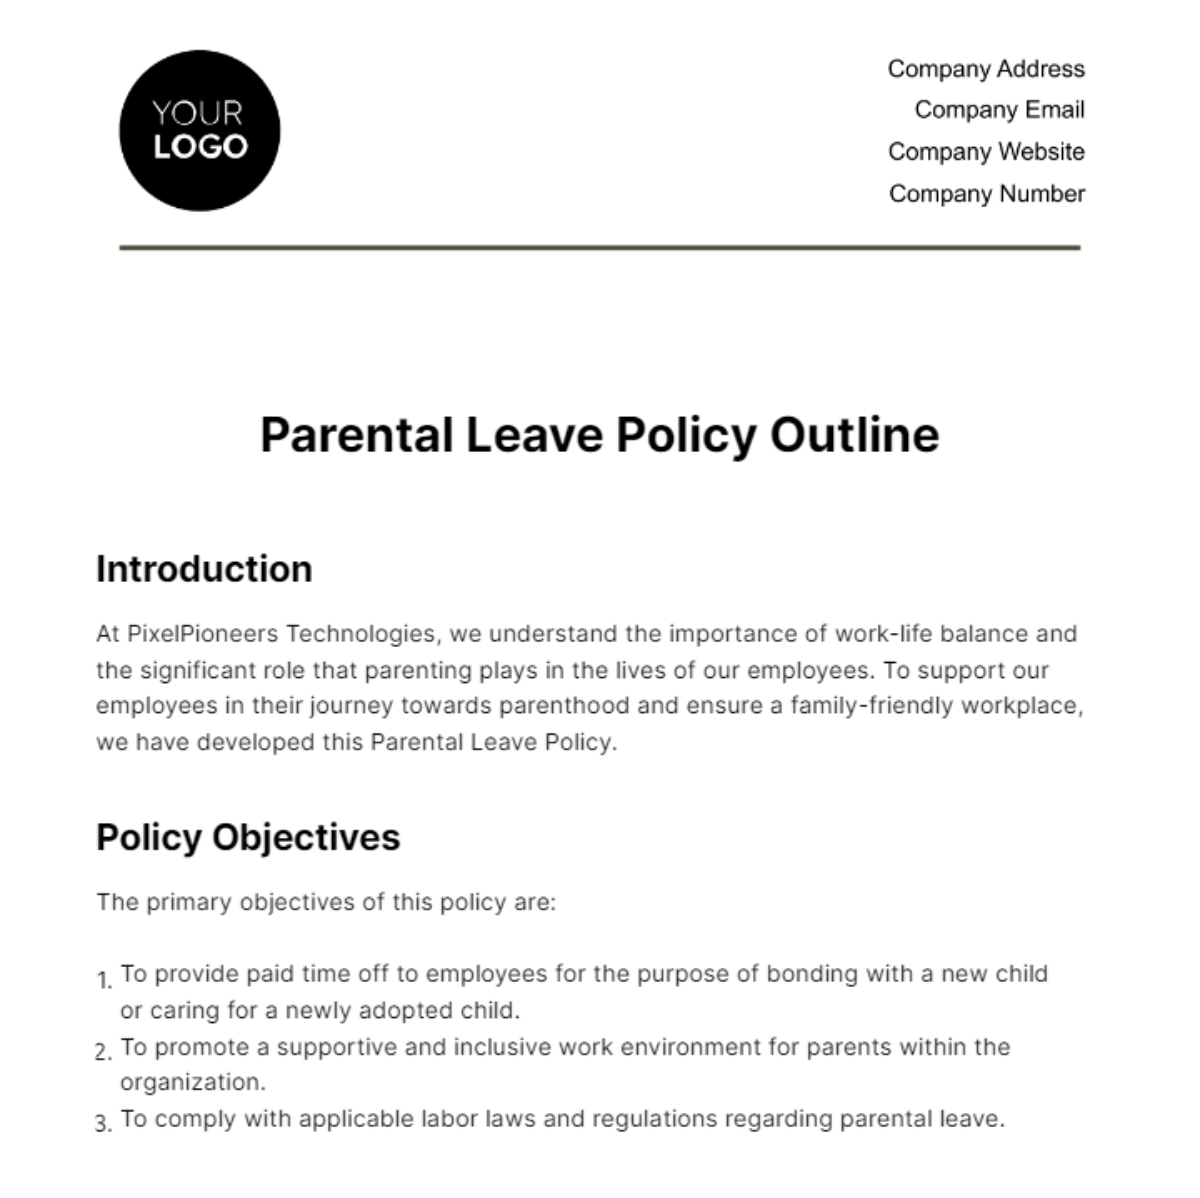 Free Parental Leave Policy Outline HR Template